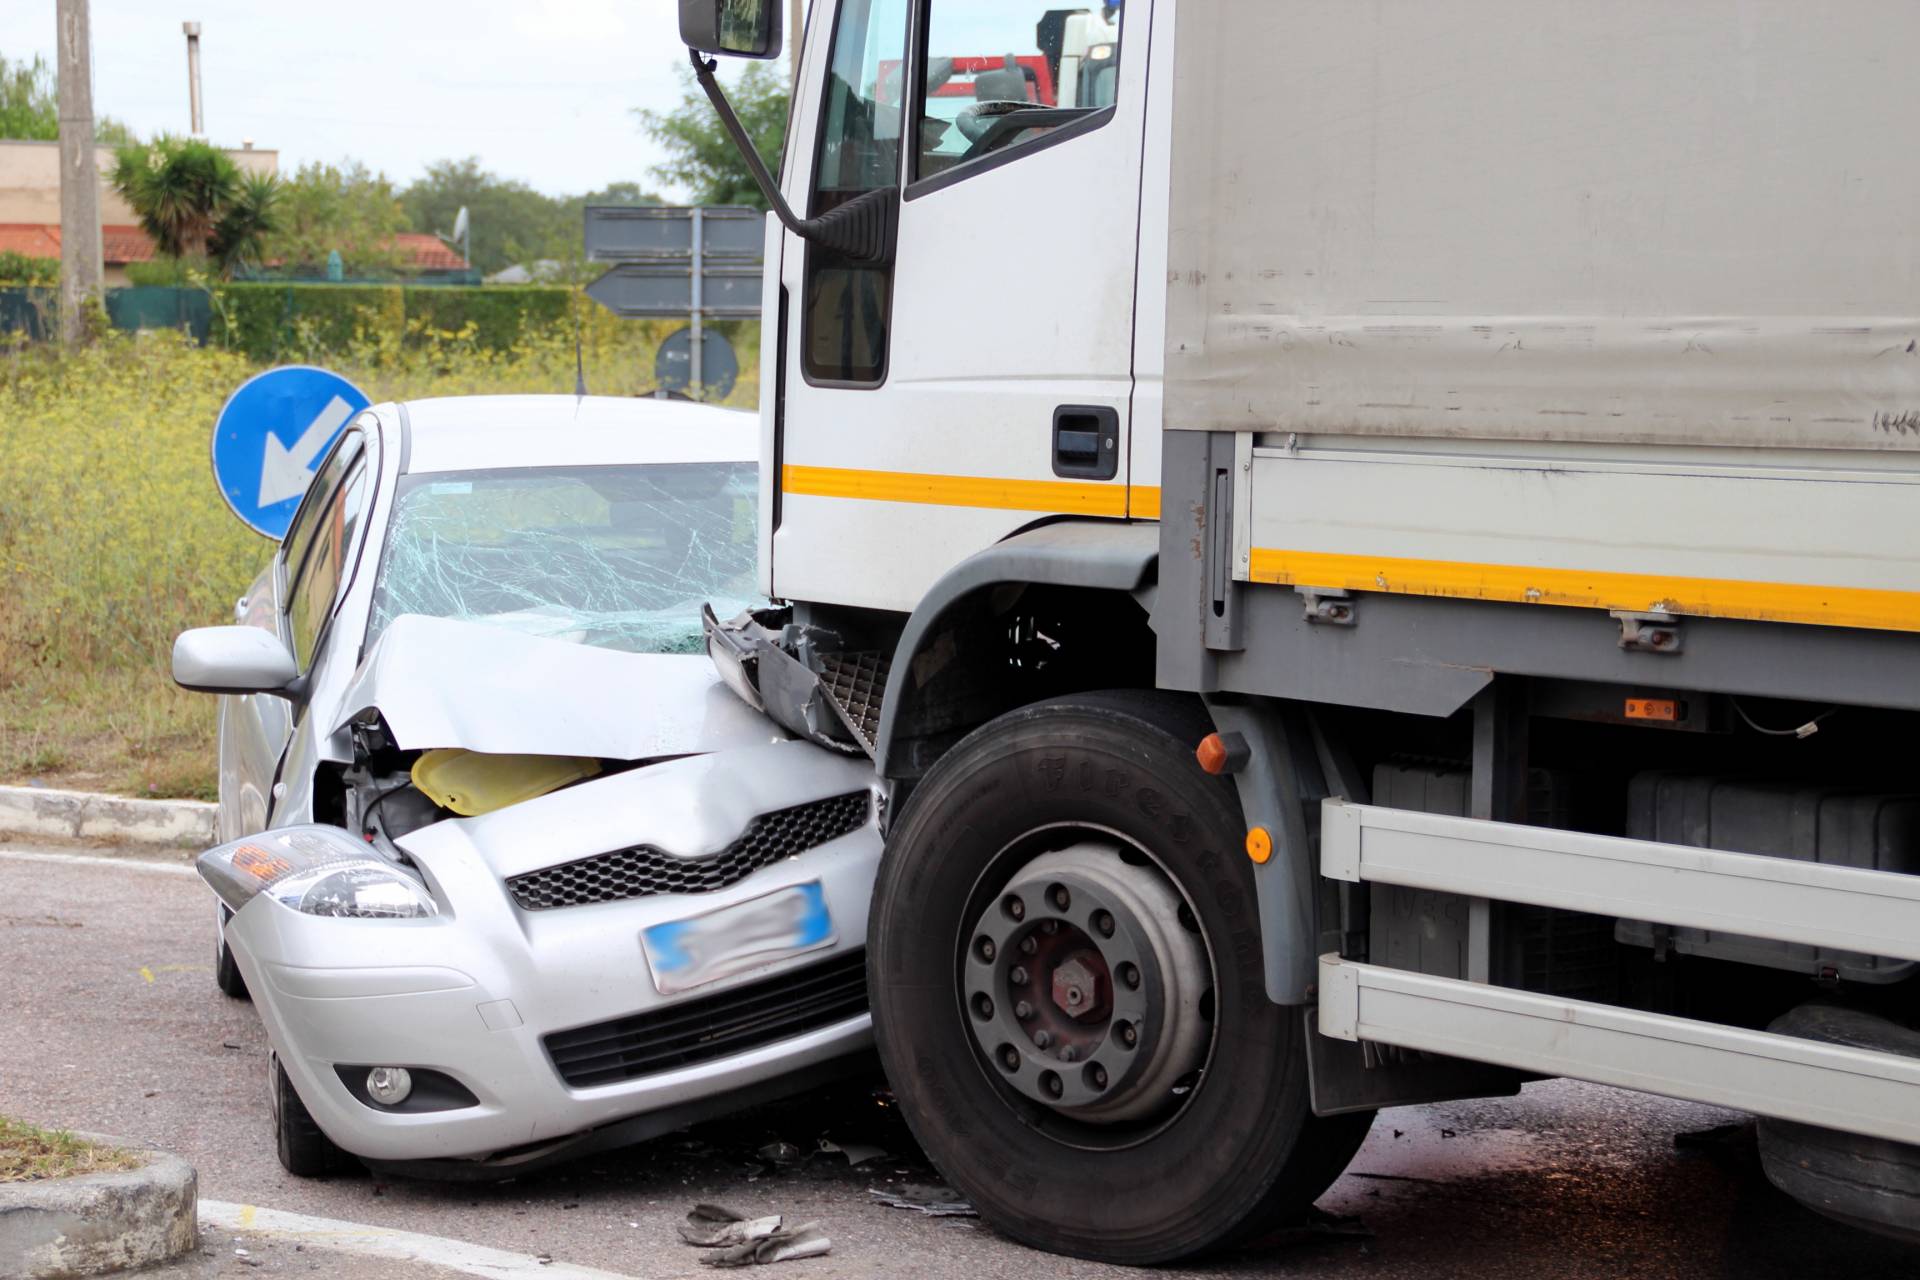 Injured in a truck accident? Contact us today!